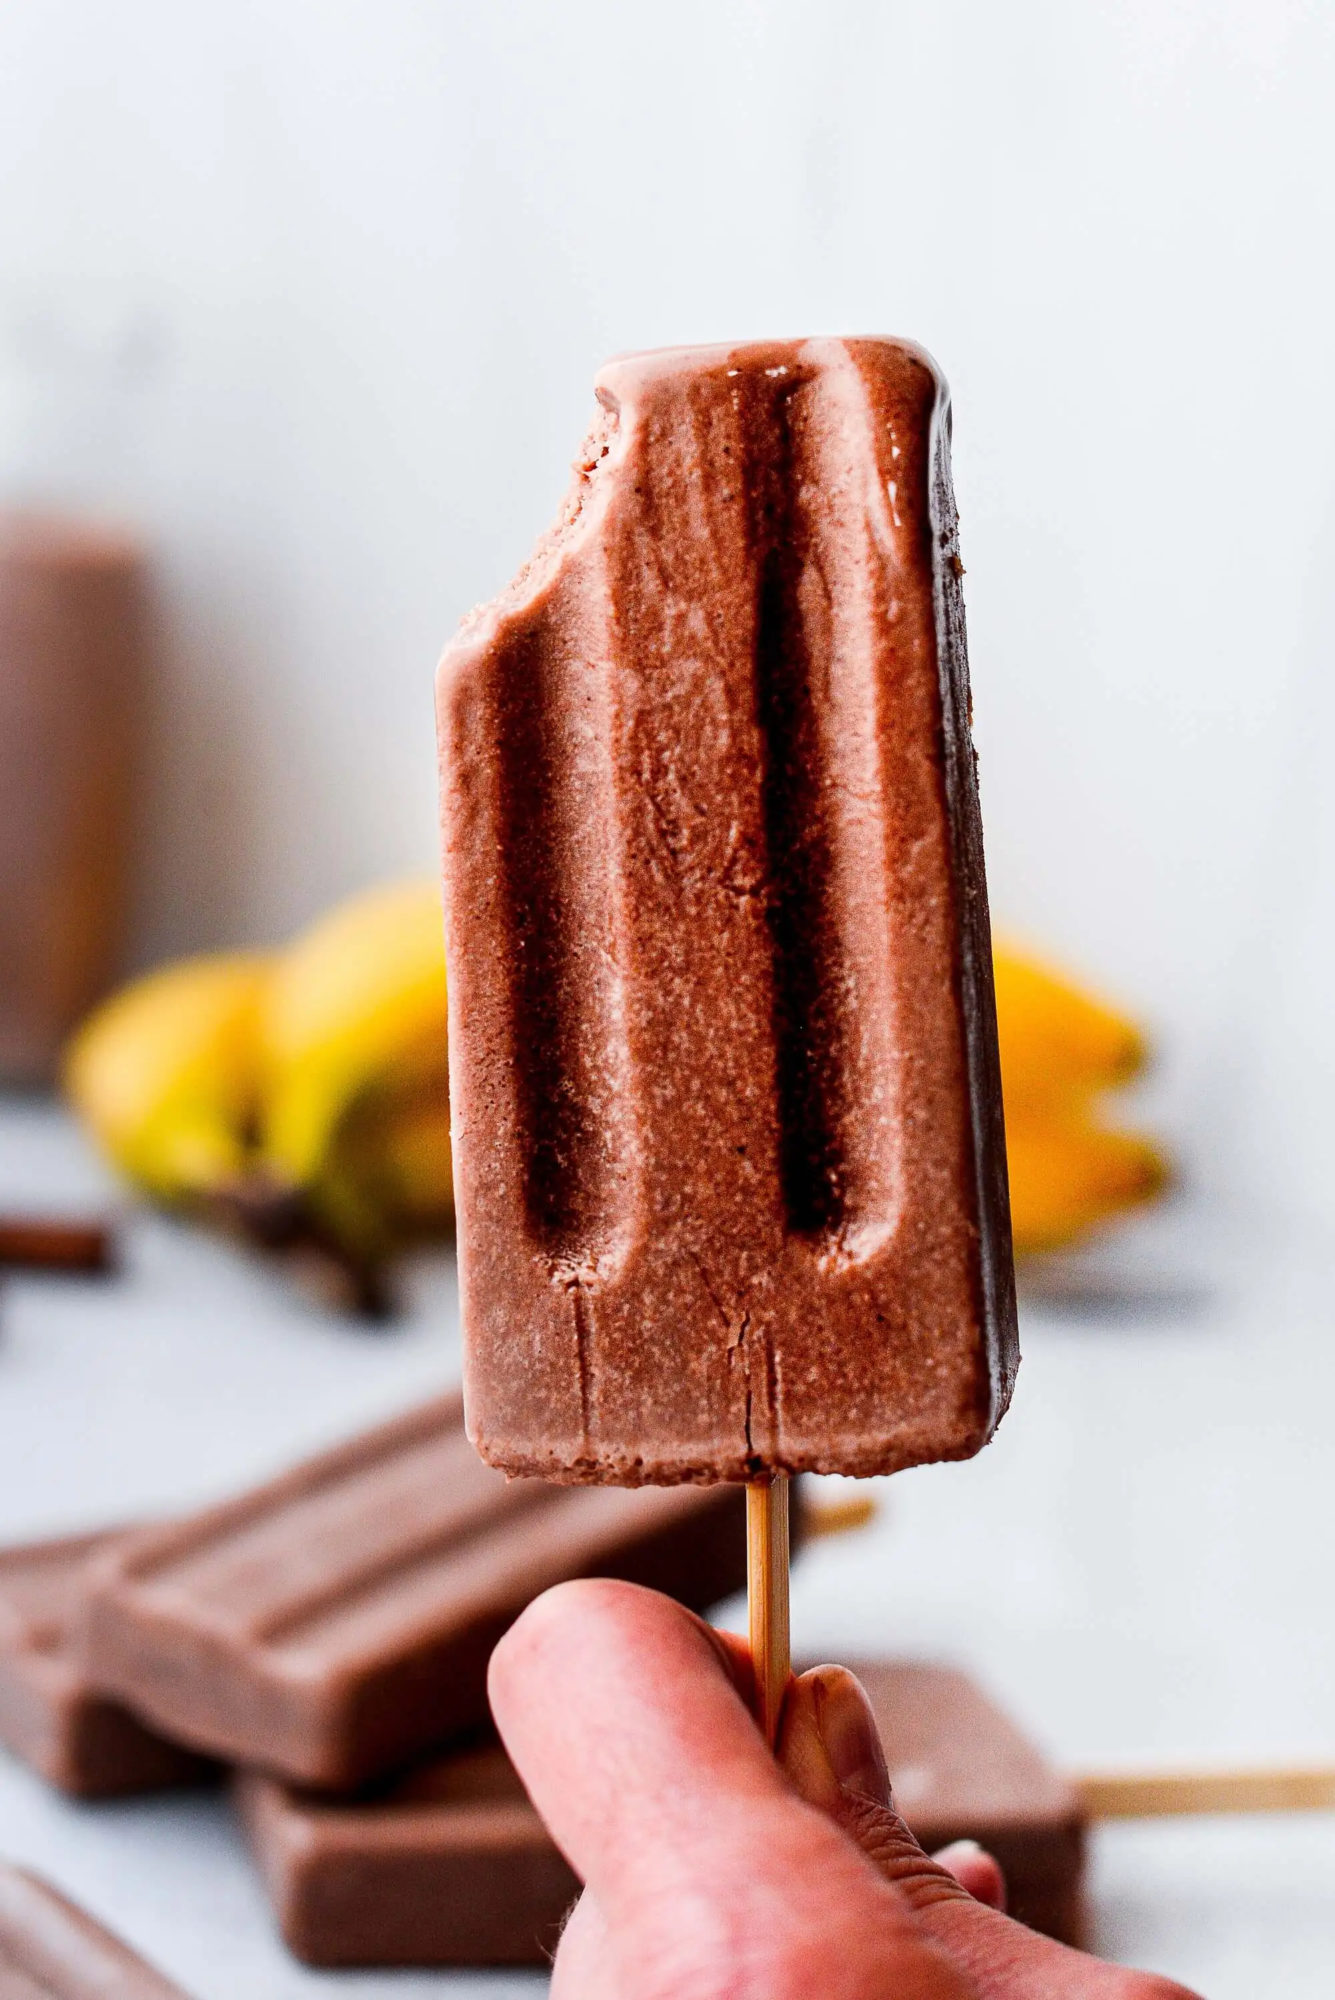 A hand holding a Chocolate Fudgesicle, with bananas, chocolate, and more fudgesicles blurred in the background.